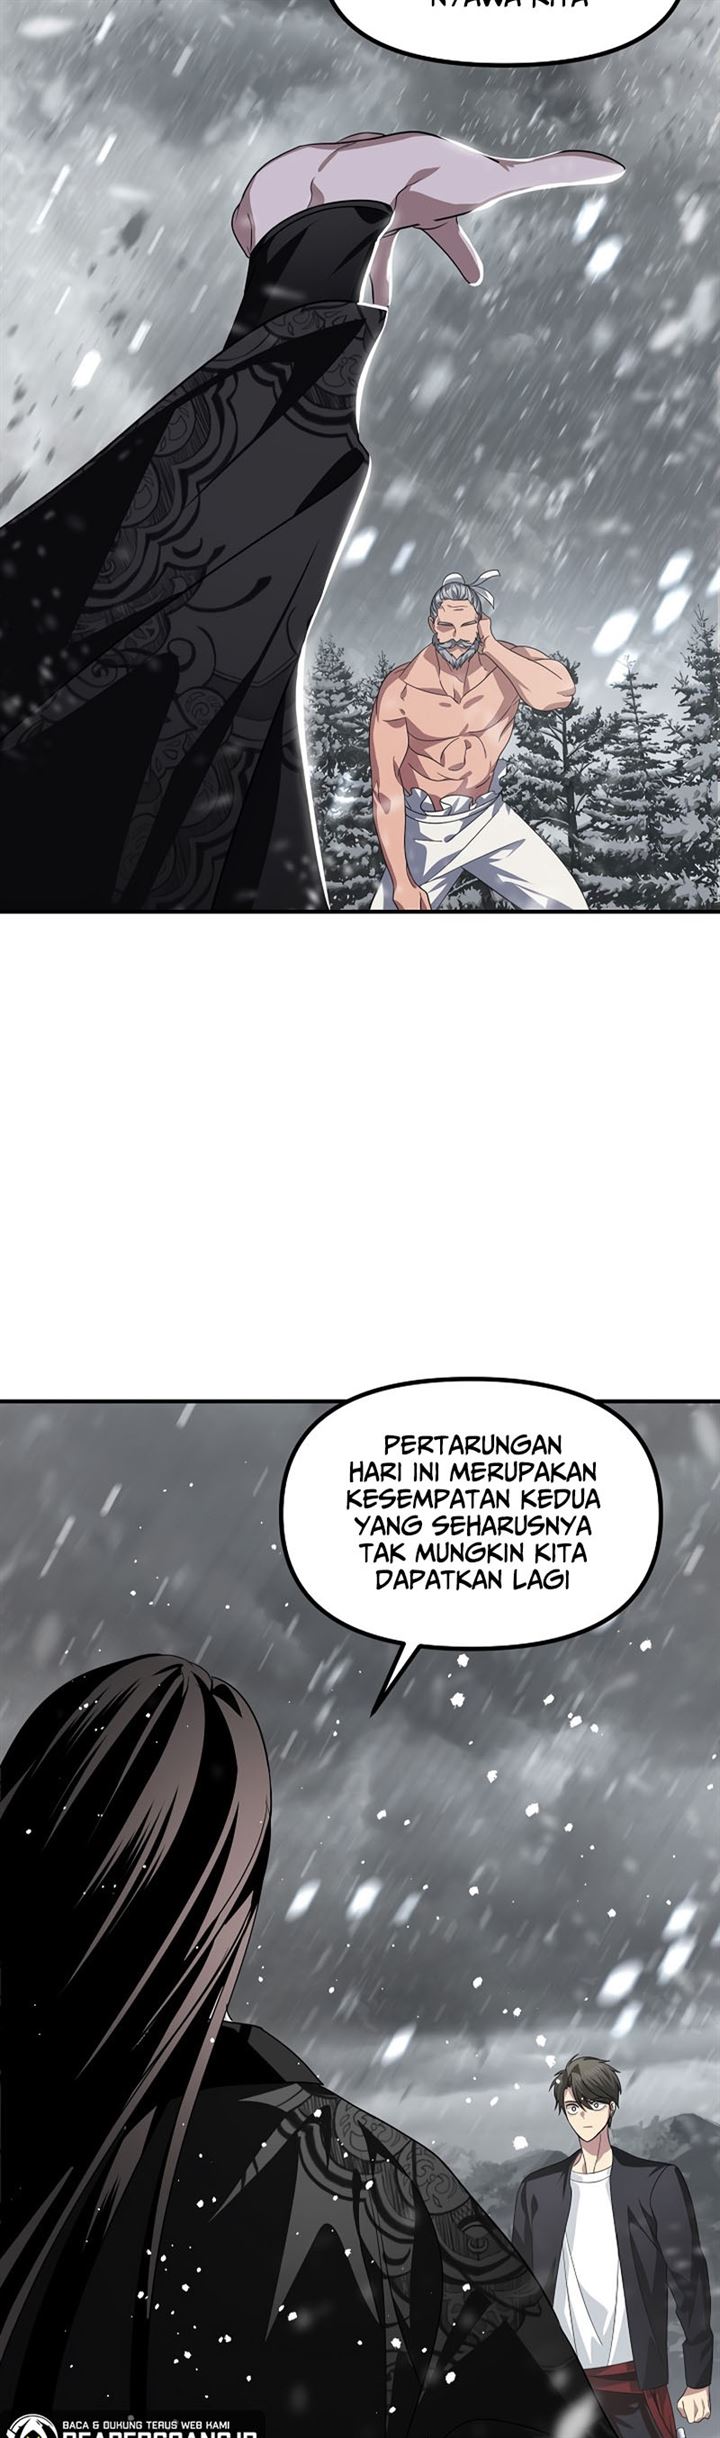 SSS-Class Suicide Hunter Chapter 75